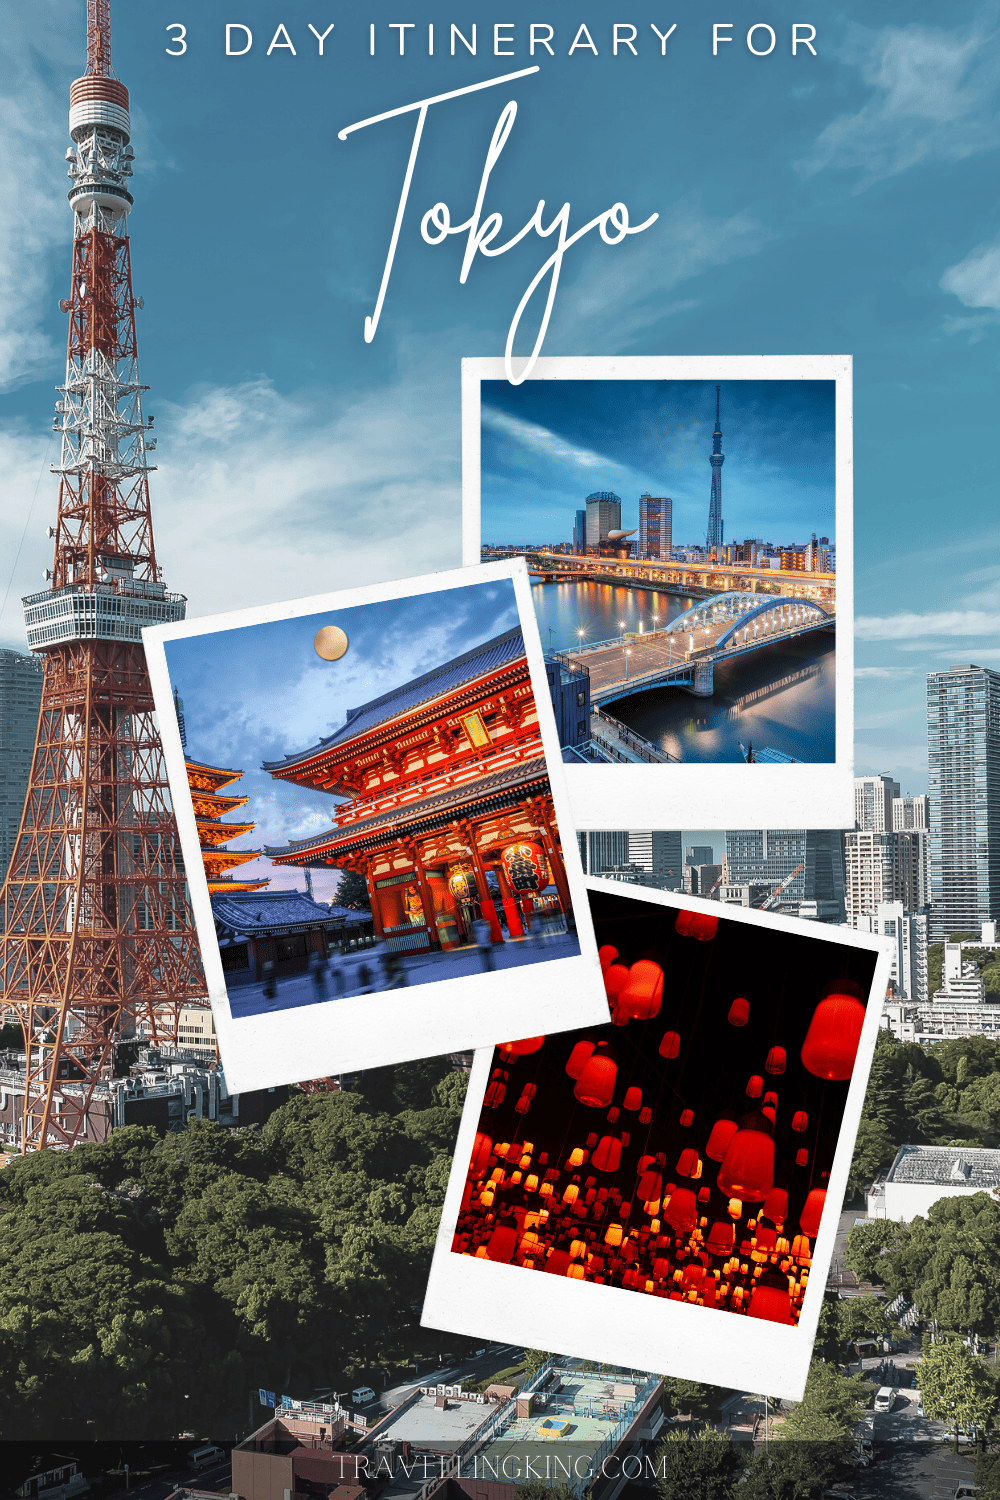 3 Day Itinerary For Tokyo